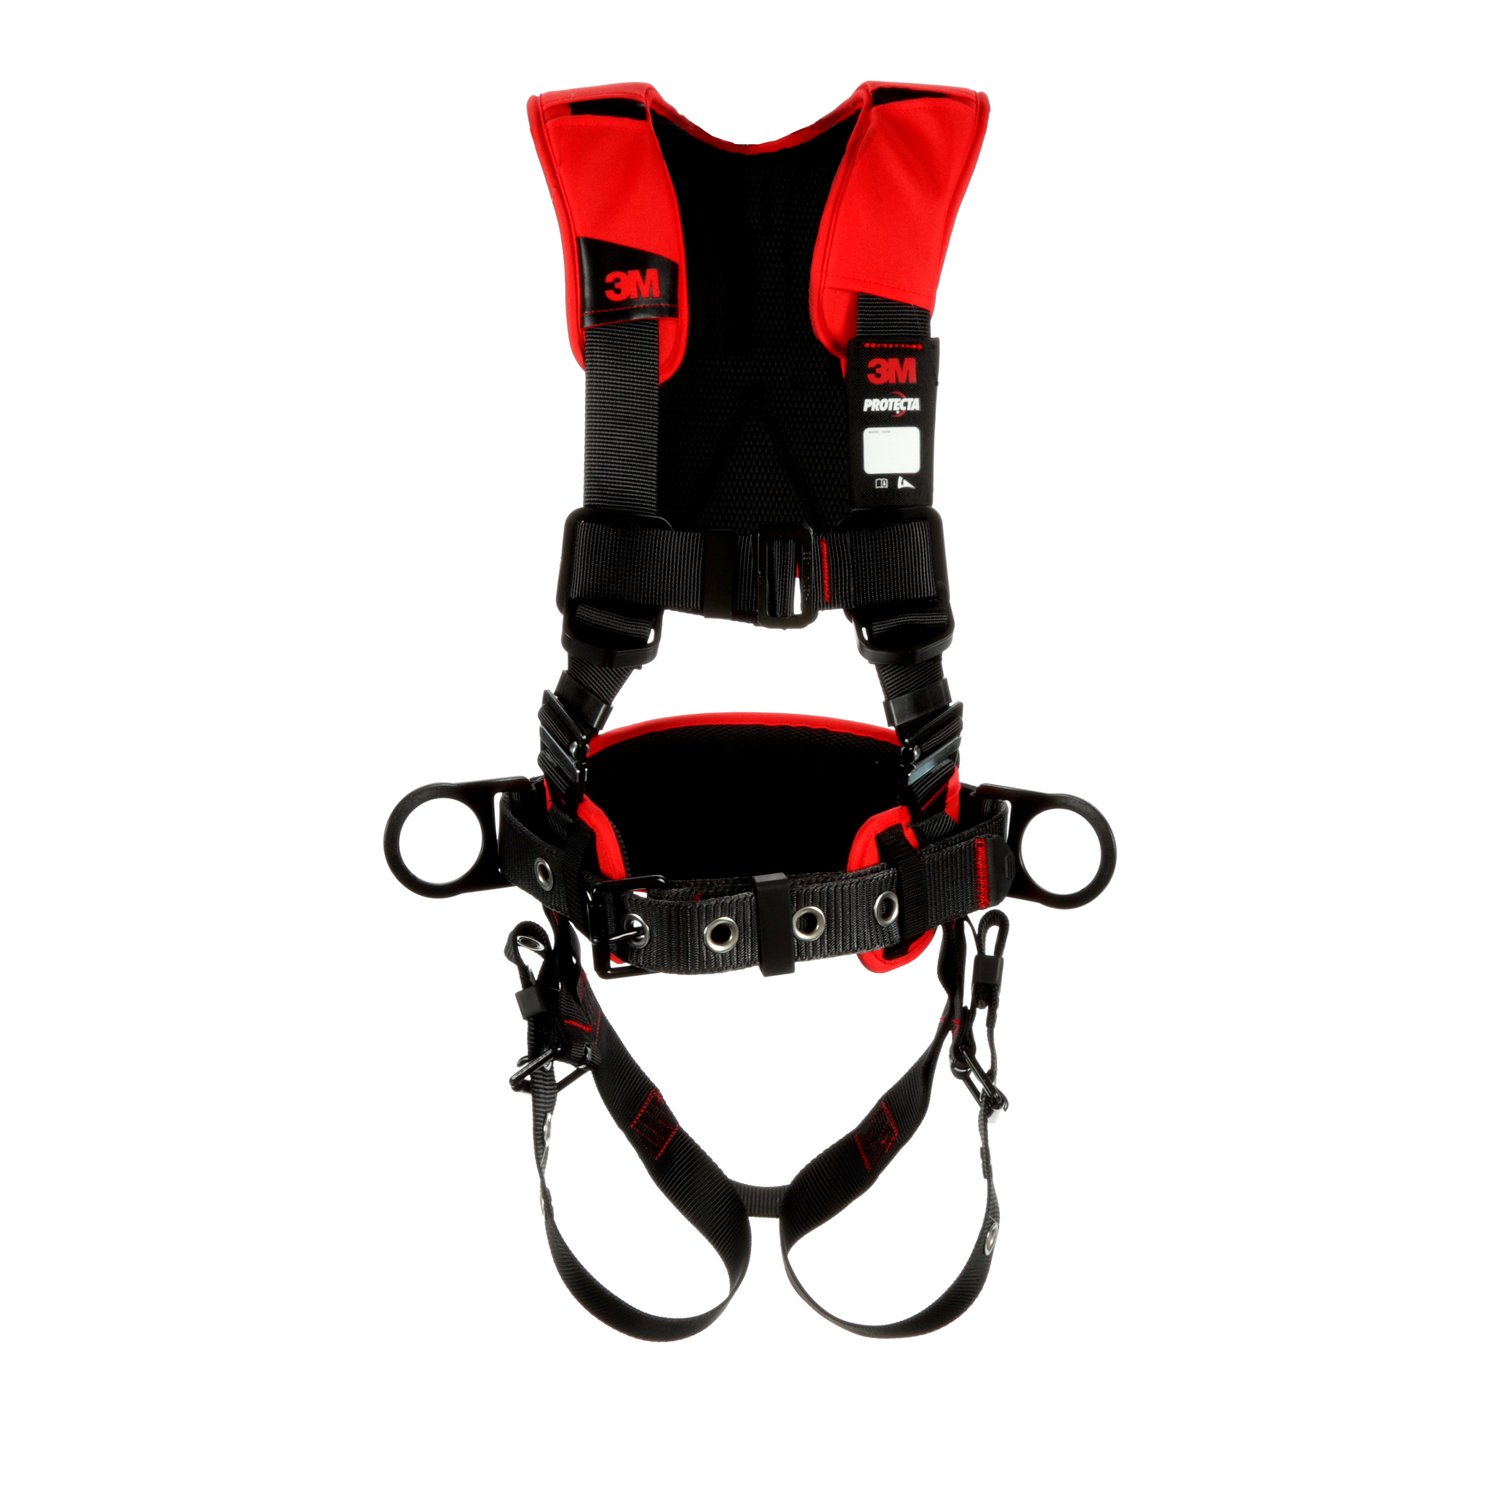 7100232011 - 3M Protecta P200 Comfort Construction Positioning Safety Harness
1161204, Small